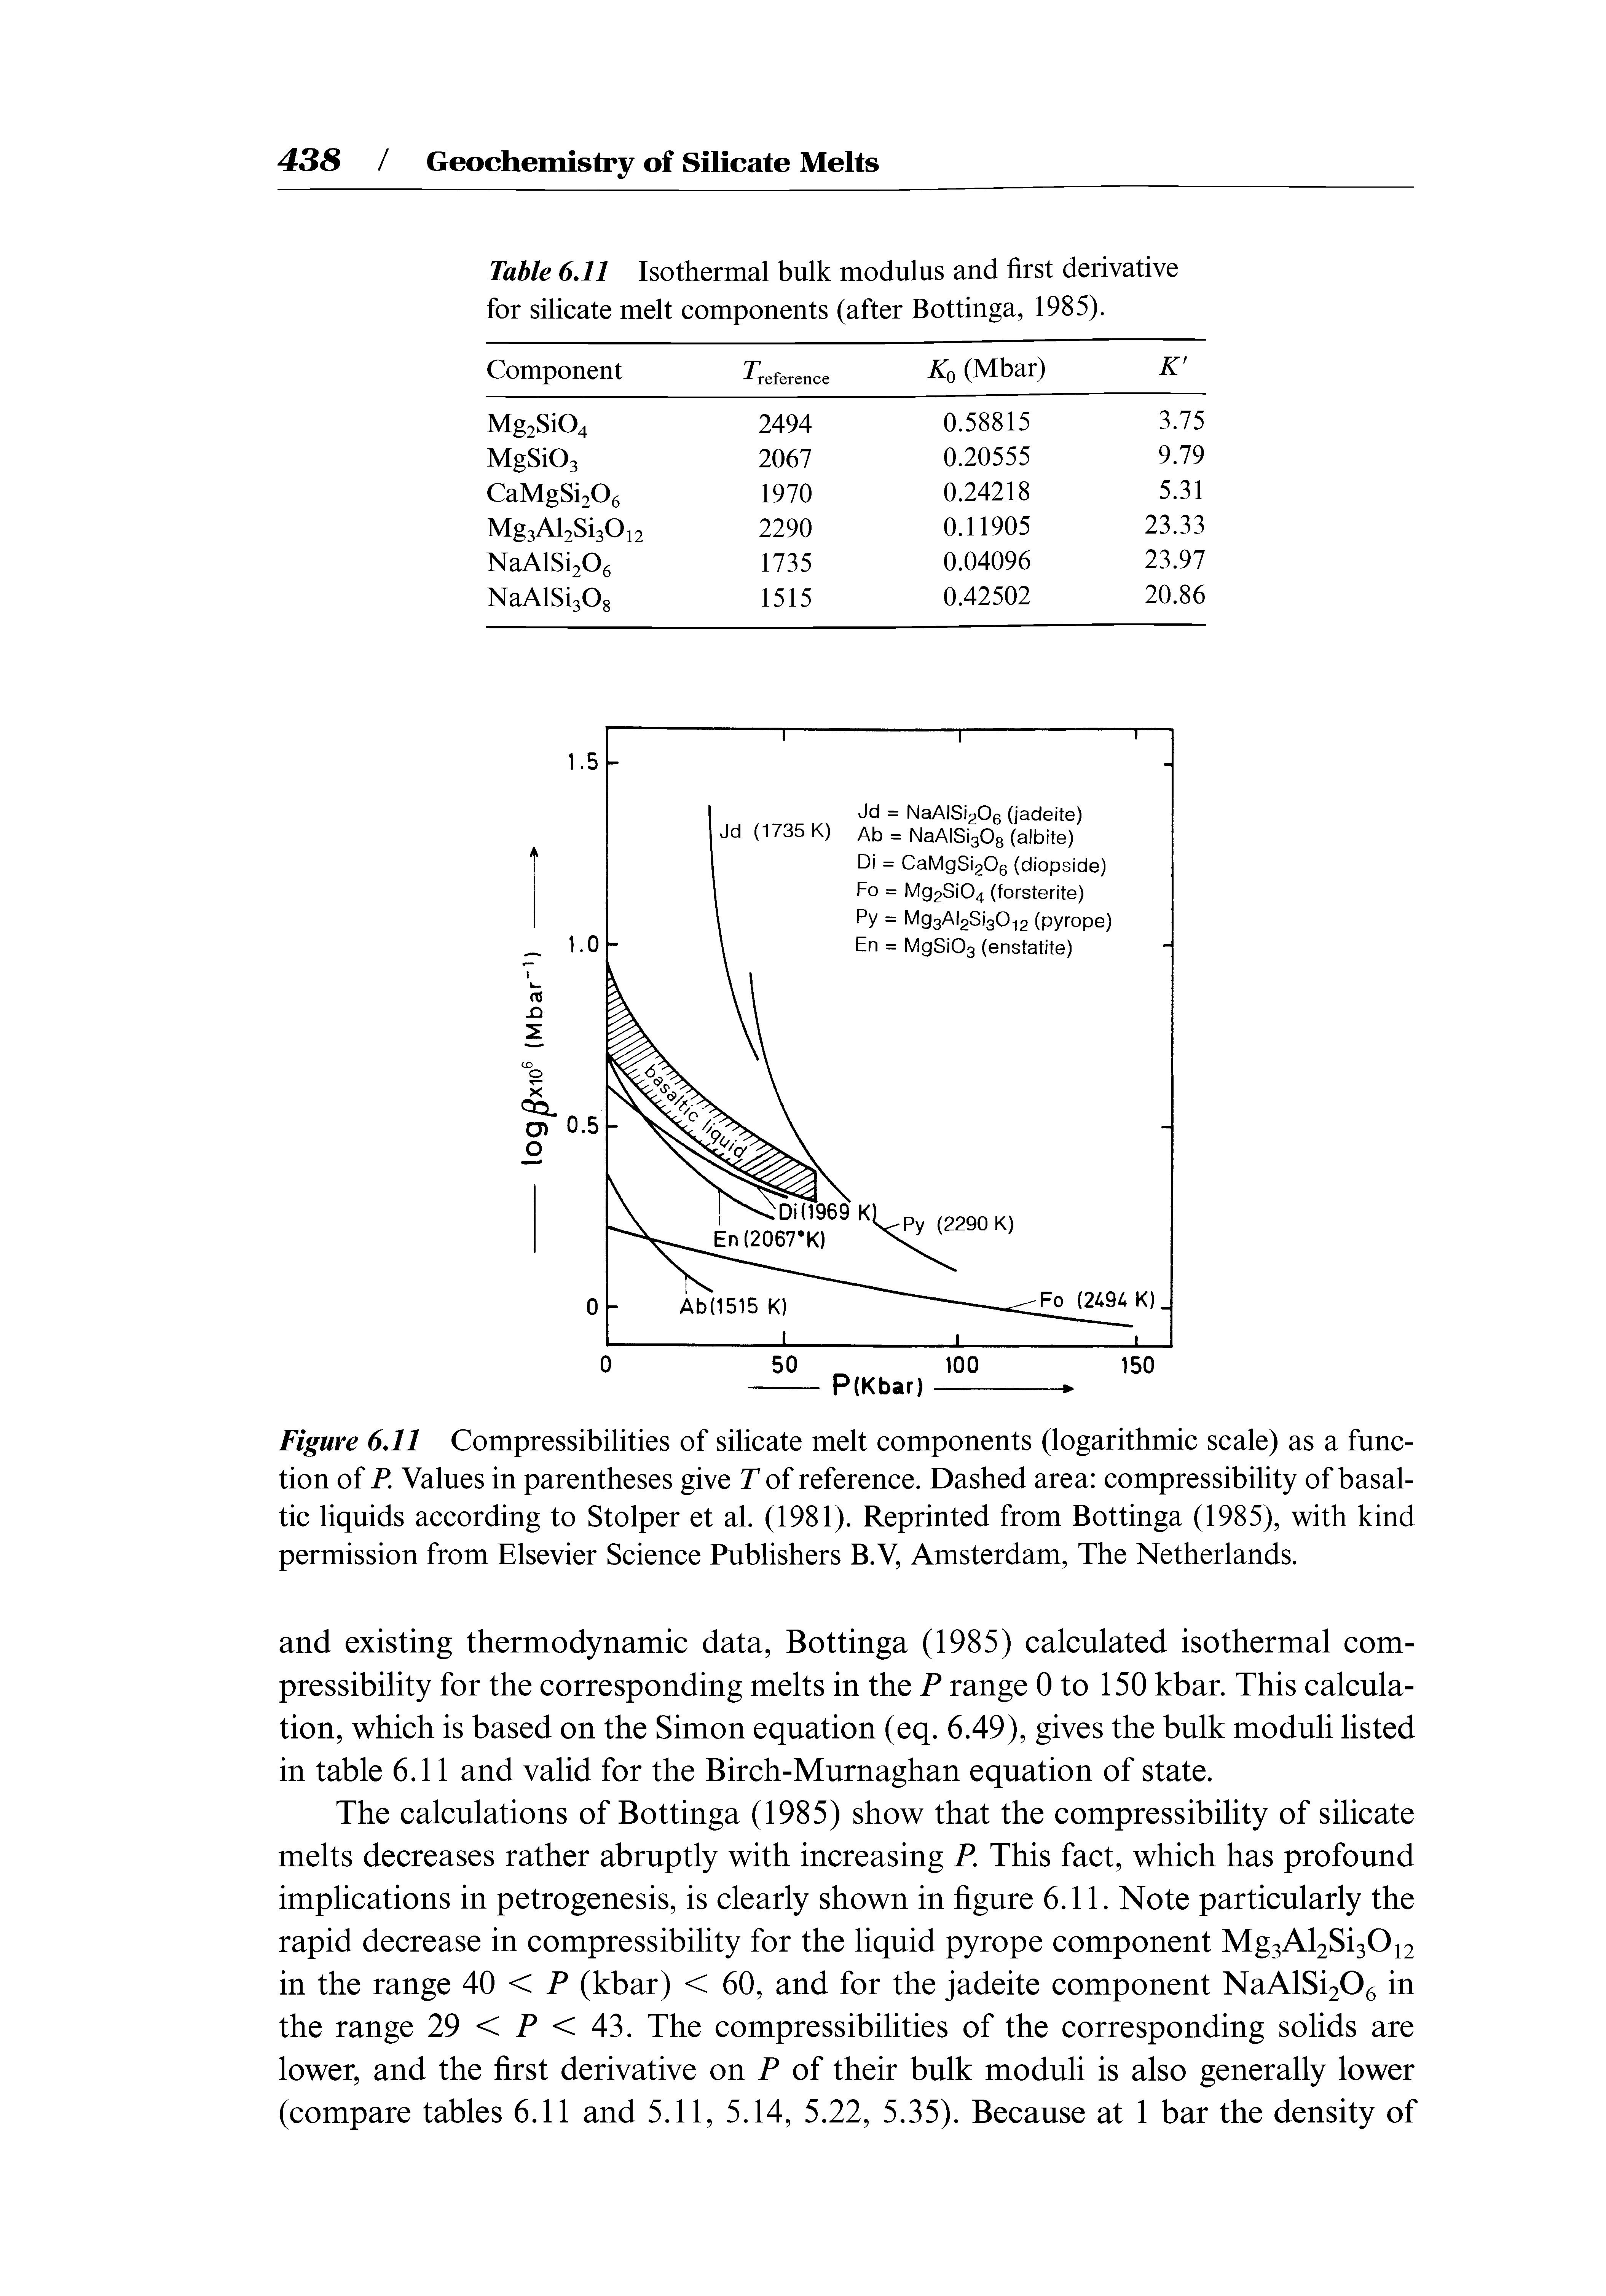 Table 6,11 Isothermal bulk modulus and first derivative for silicate melt components (after Bottinga, 1985).